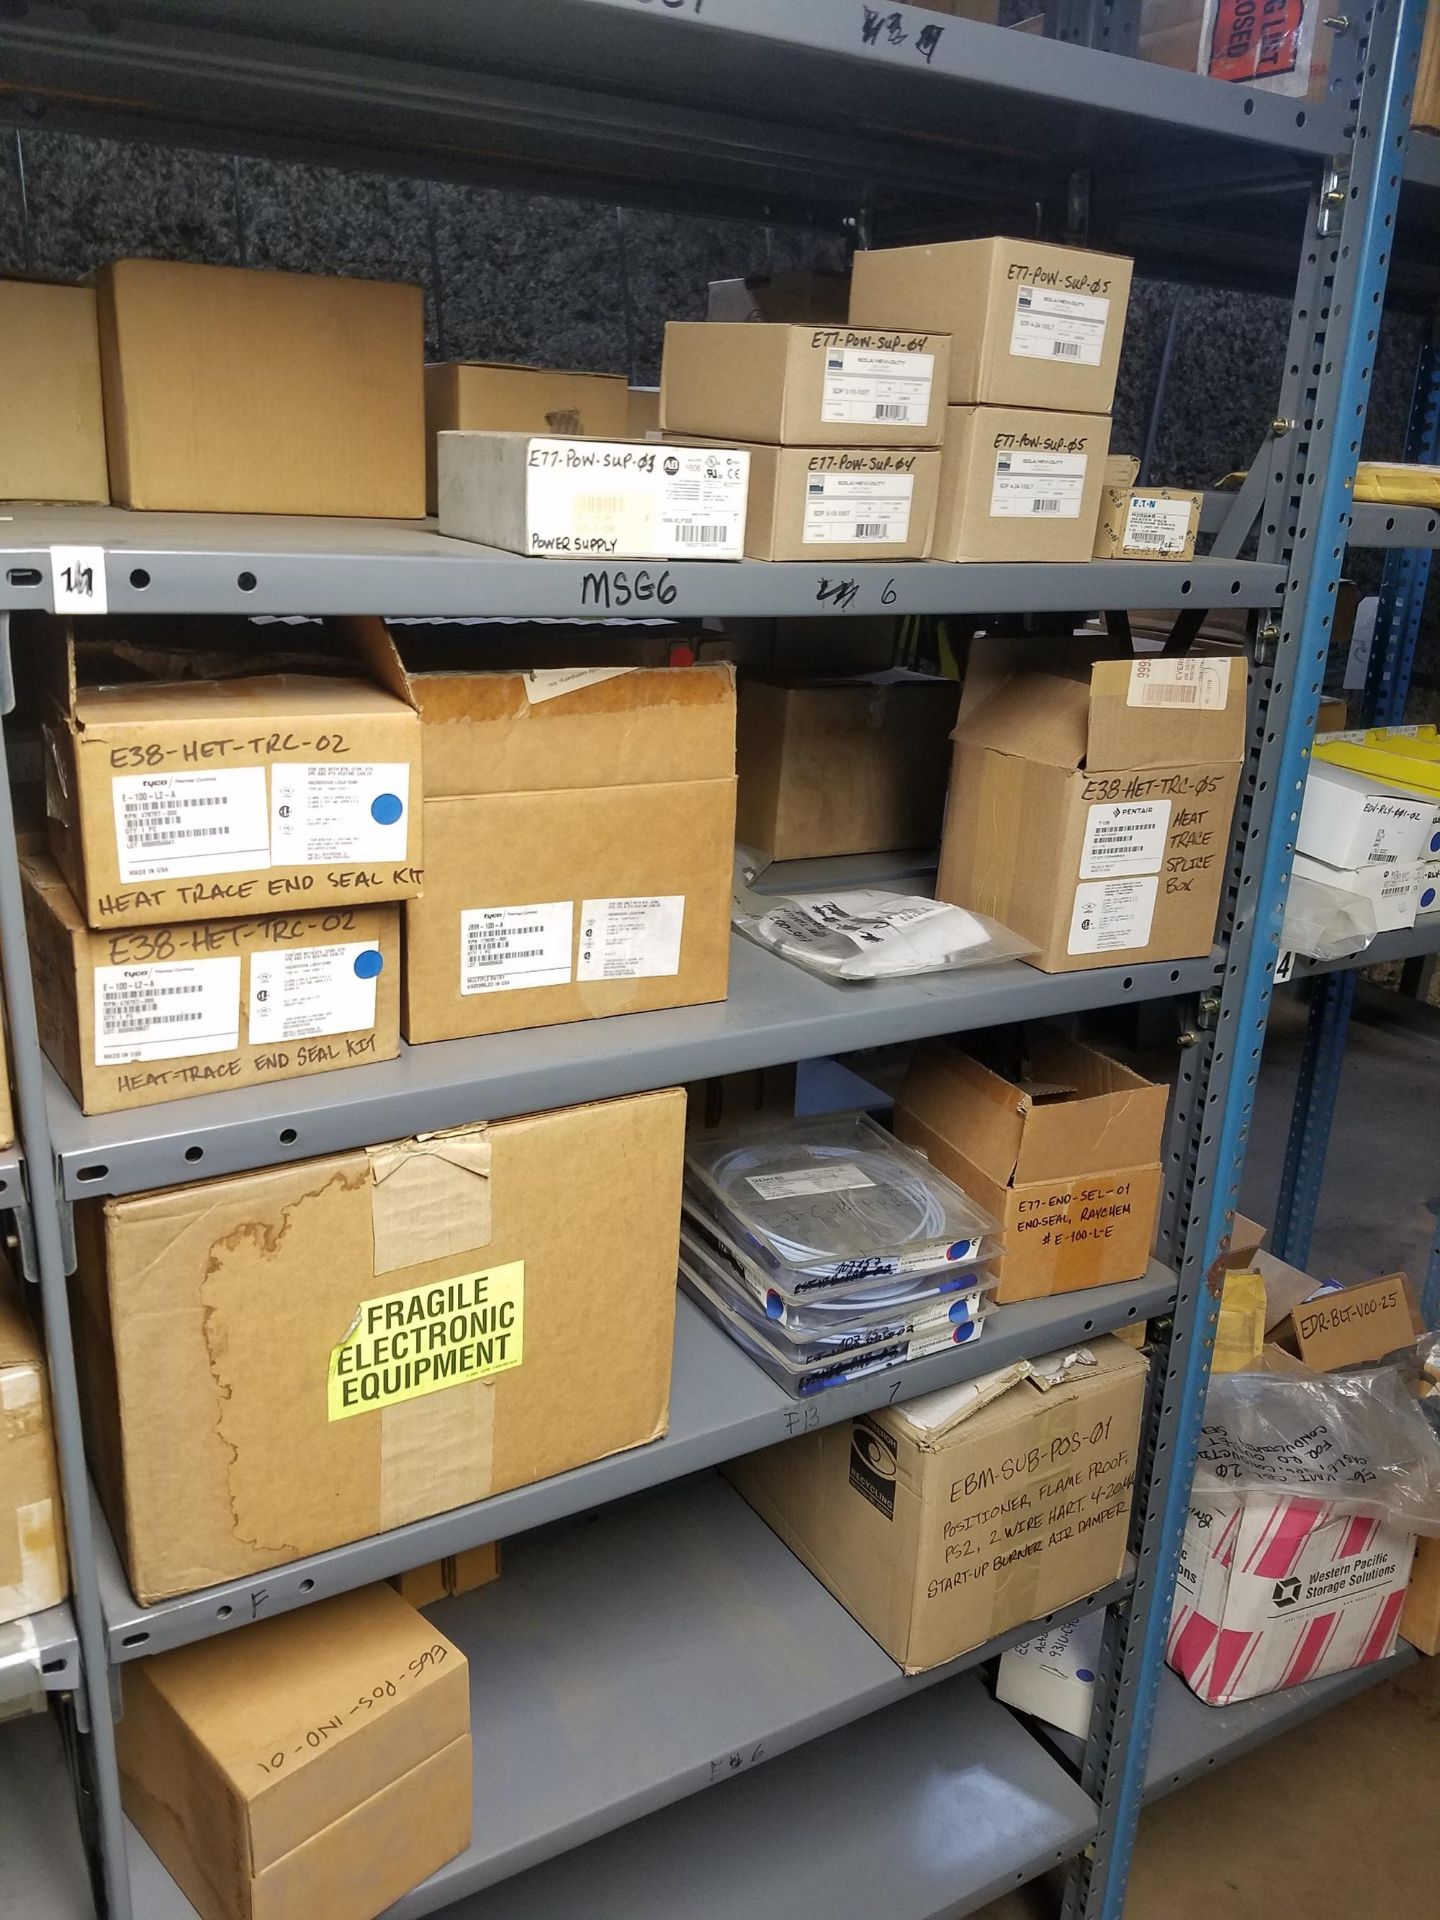 Contents of Spare Parts Storage Area On Mezzanine | Rig Fee: $400 - Image 13 of 19